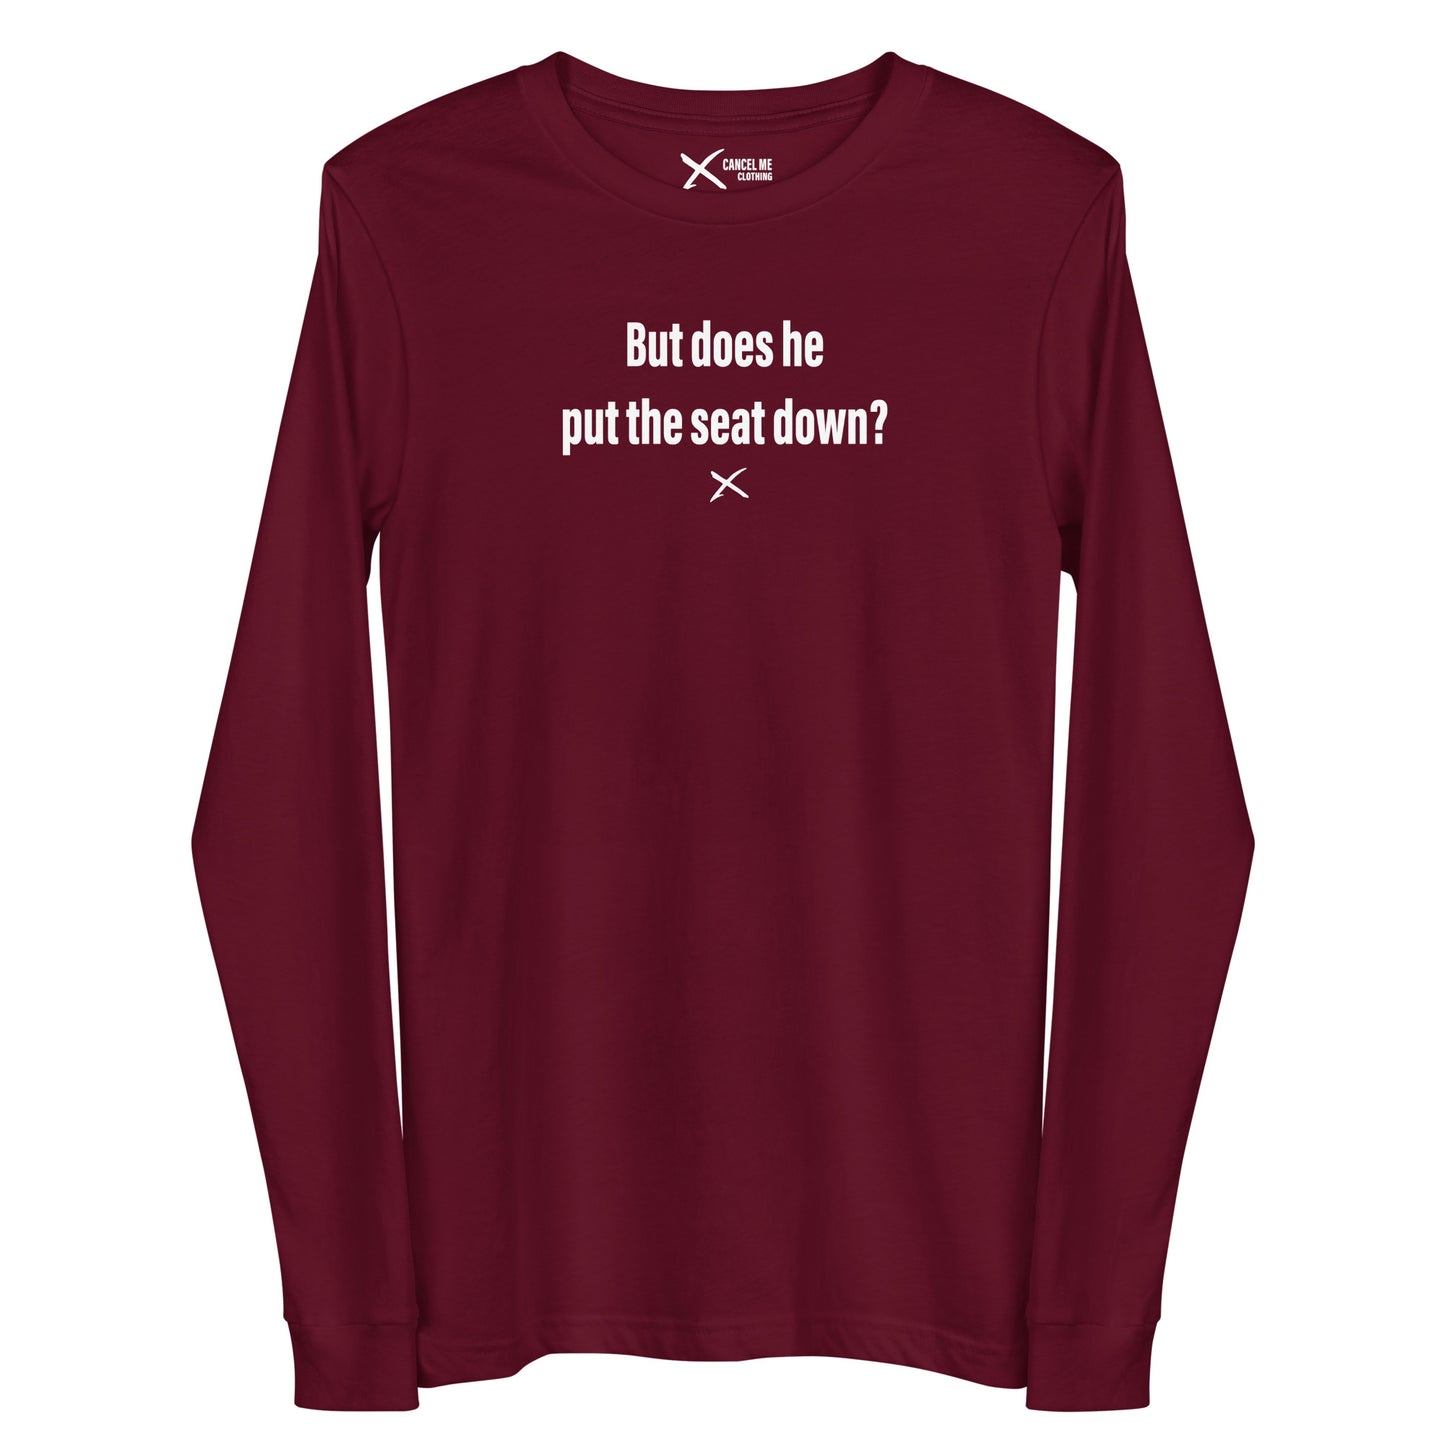 But does he put the seat down? - Longsleeve